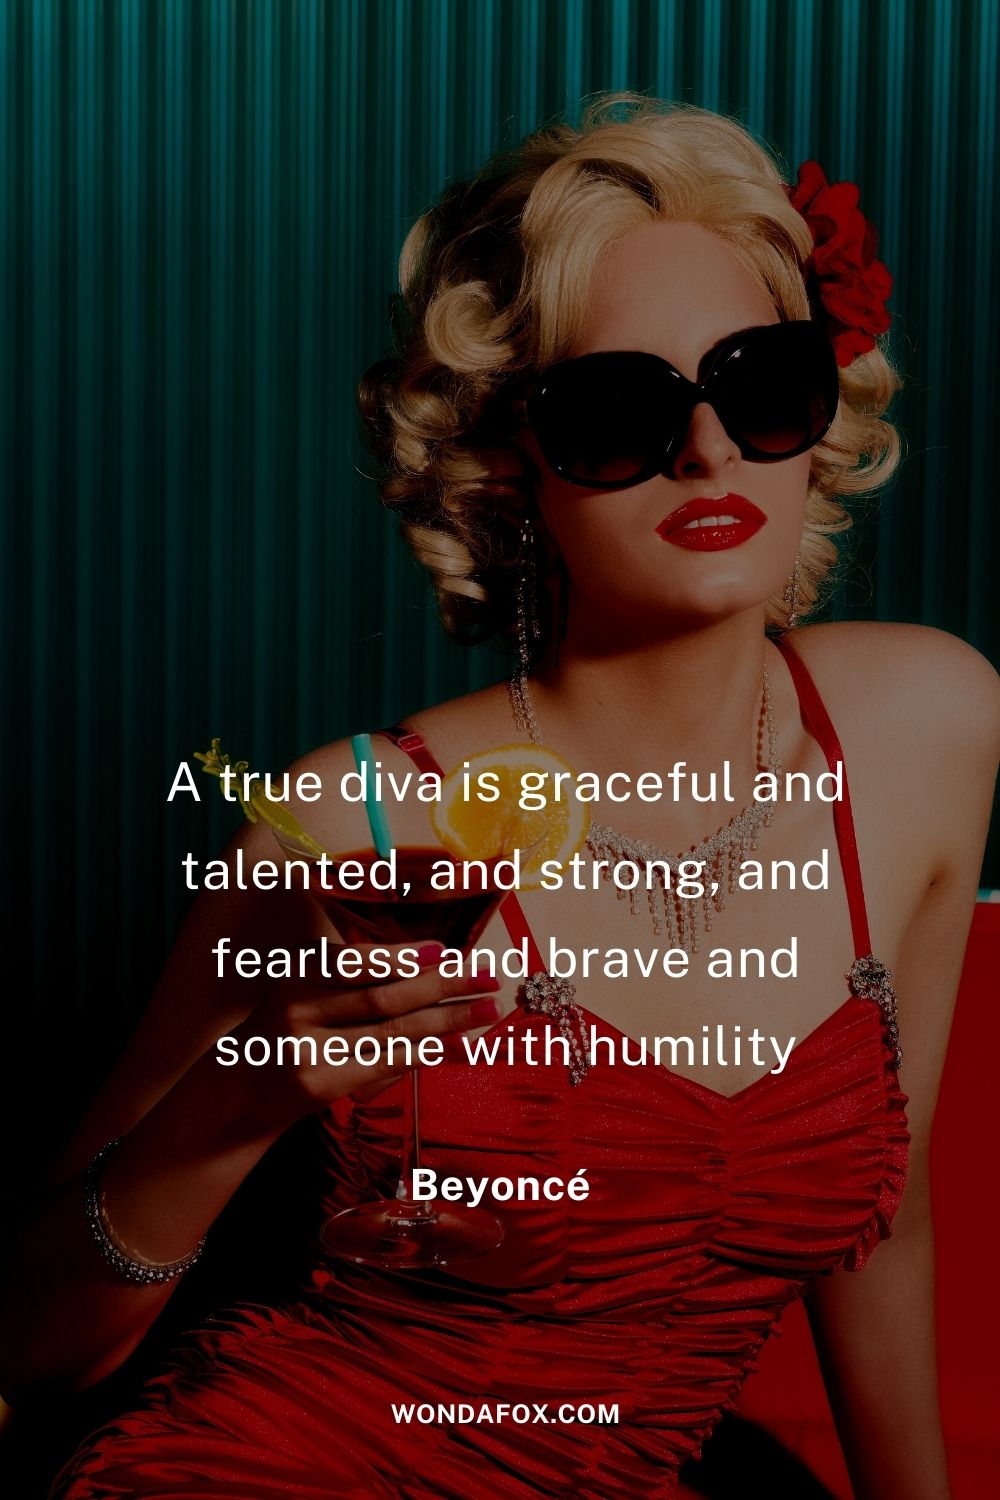 A true diva is graceful and talented, and strong, and fearless and brave and someone with humility